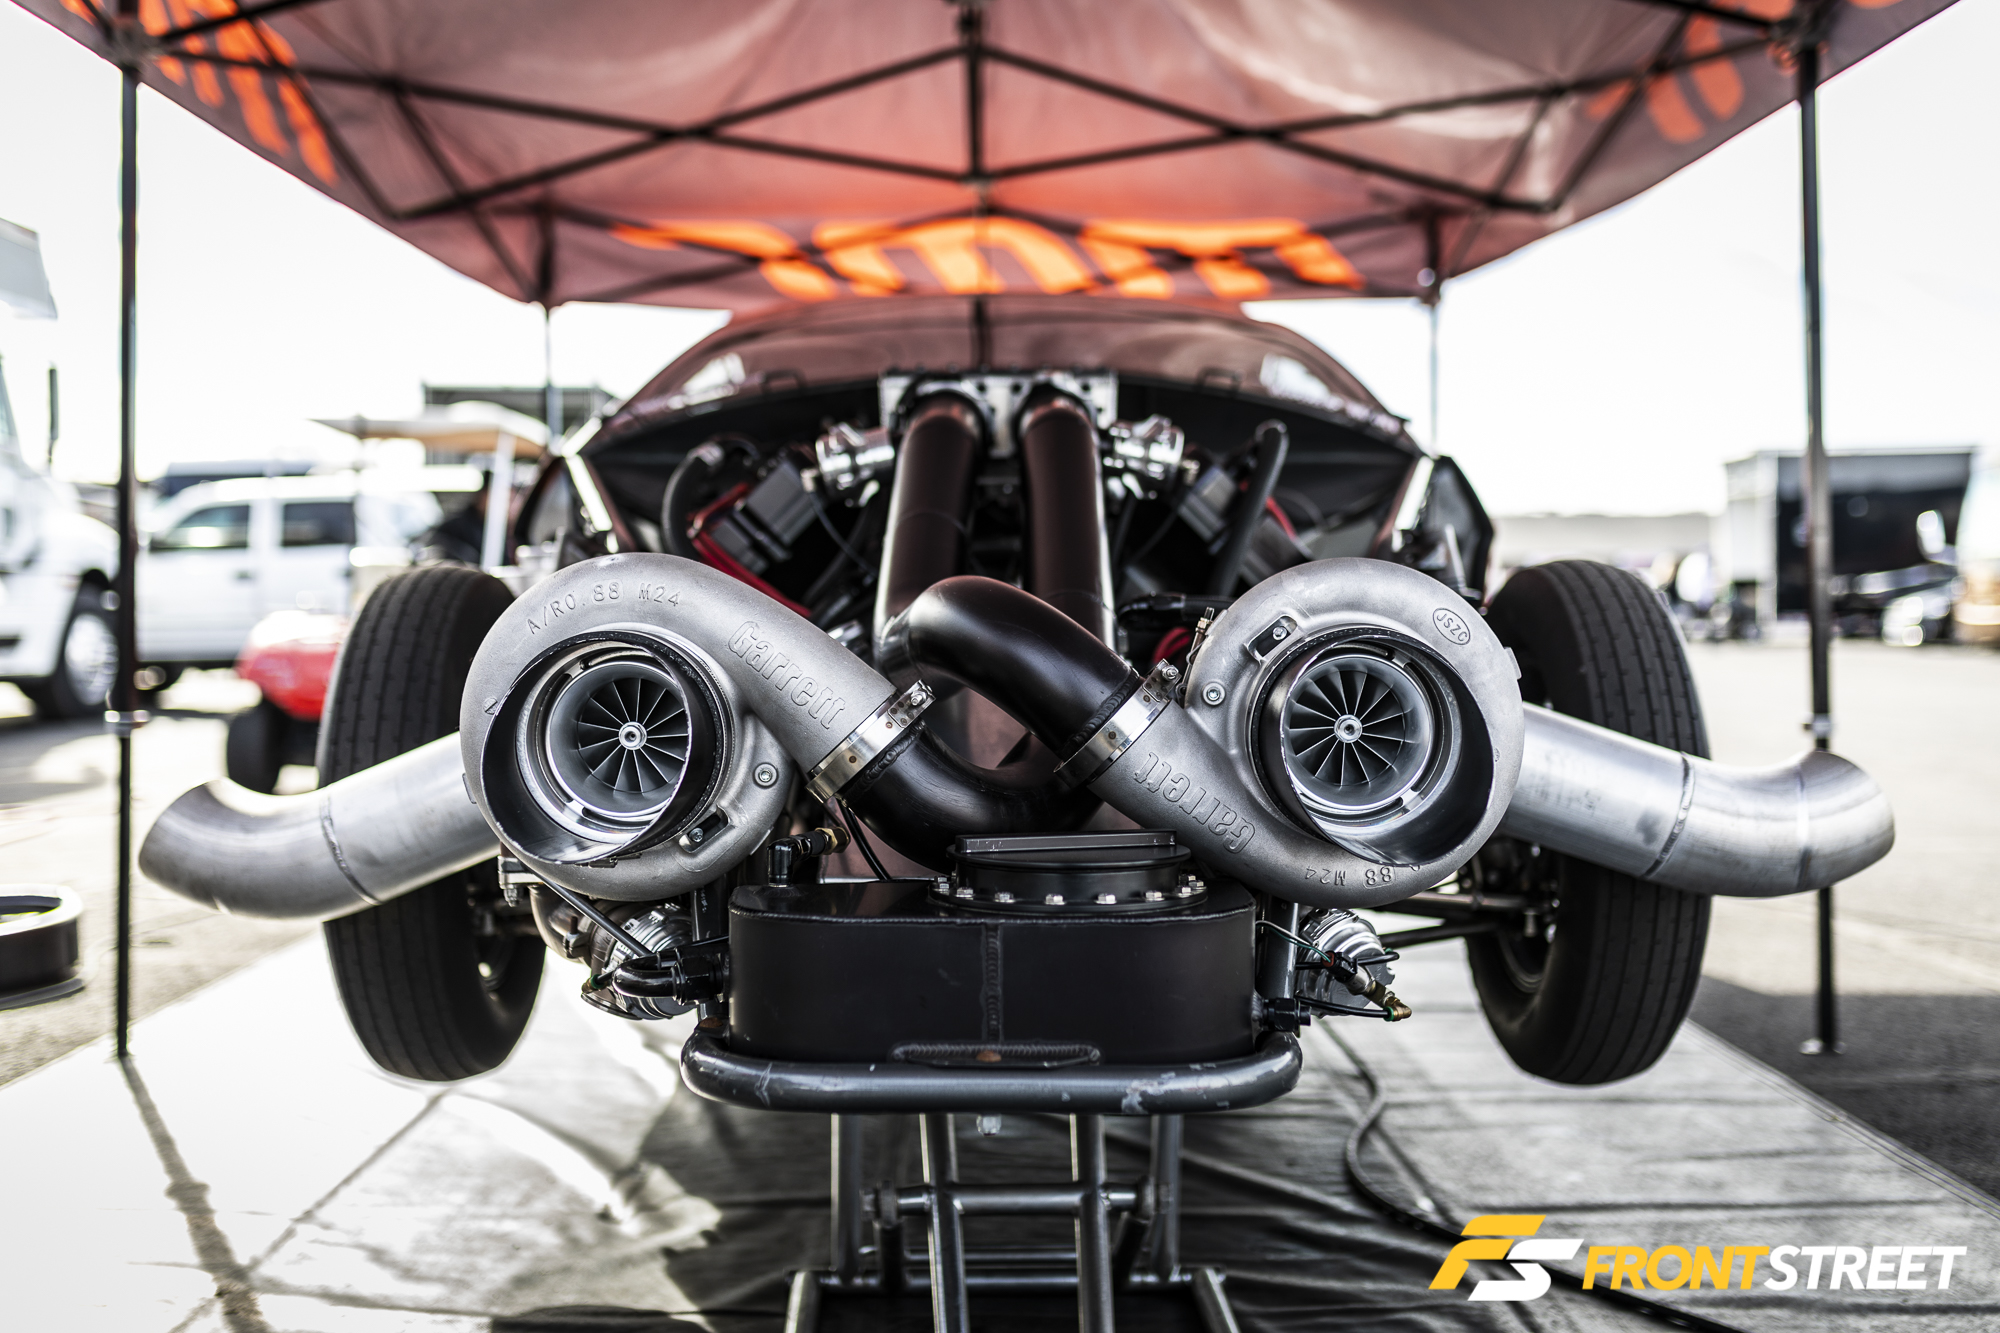 Greg Seth-Hunter’s Coyote-Powered Pro Mod Is Breaking Barriers